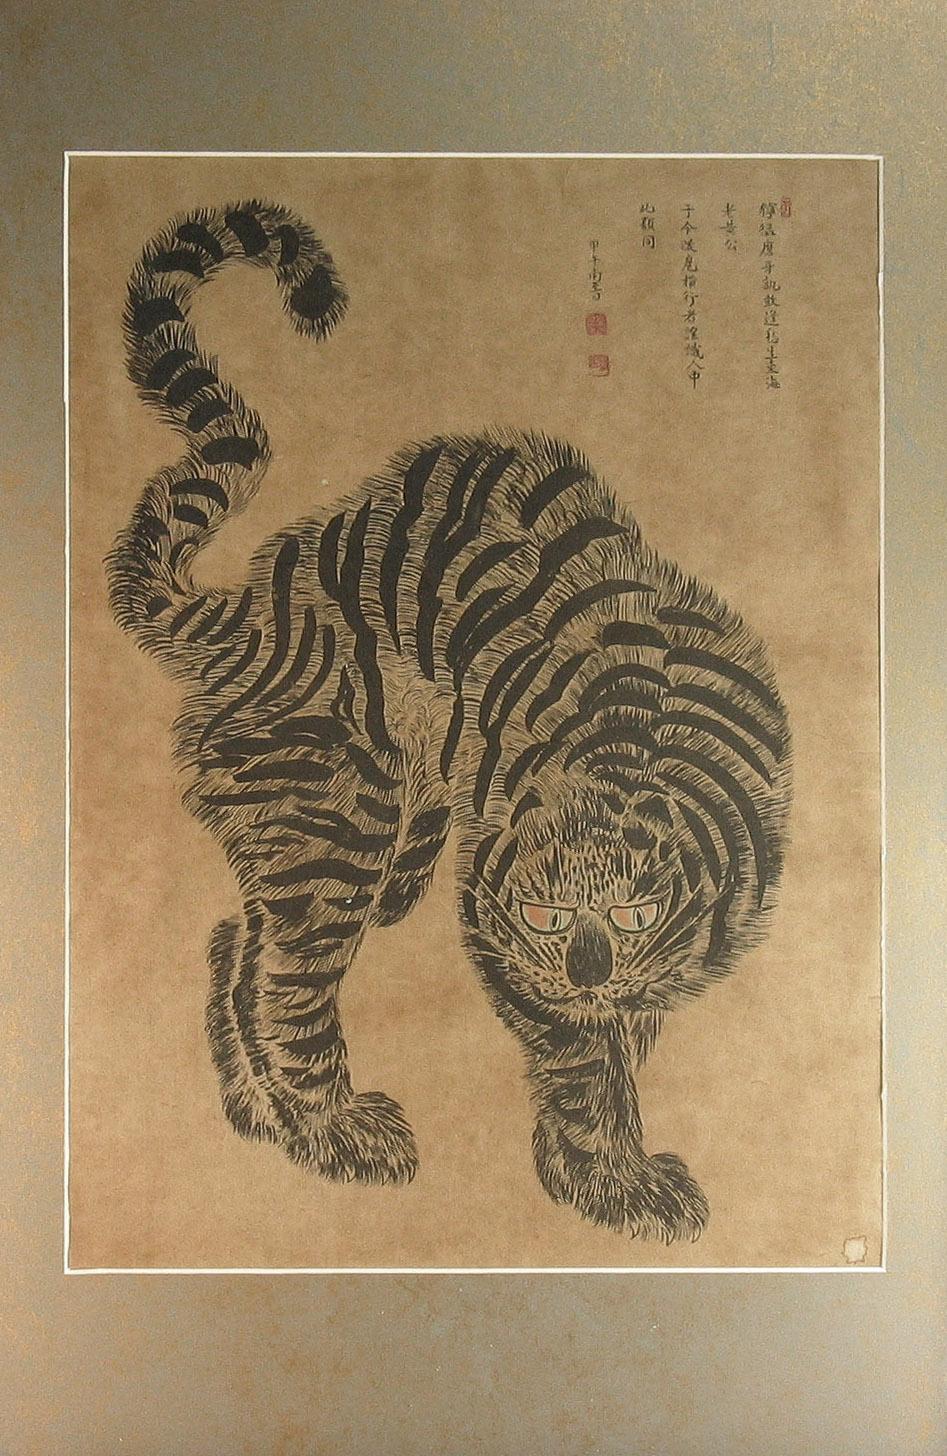 Paper Korean Scroll of a Prowling Tiger, 20th Century